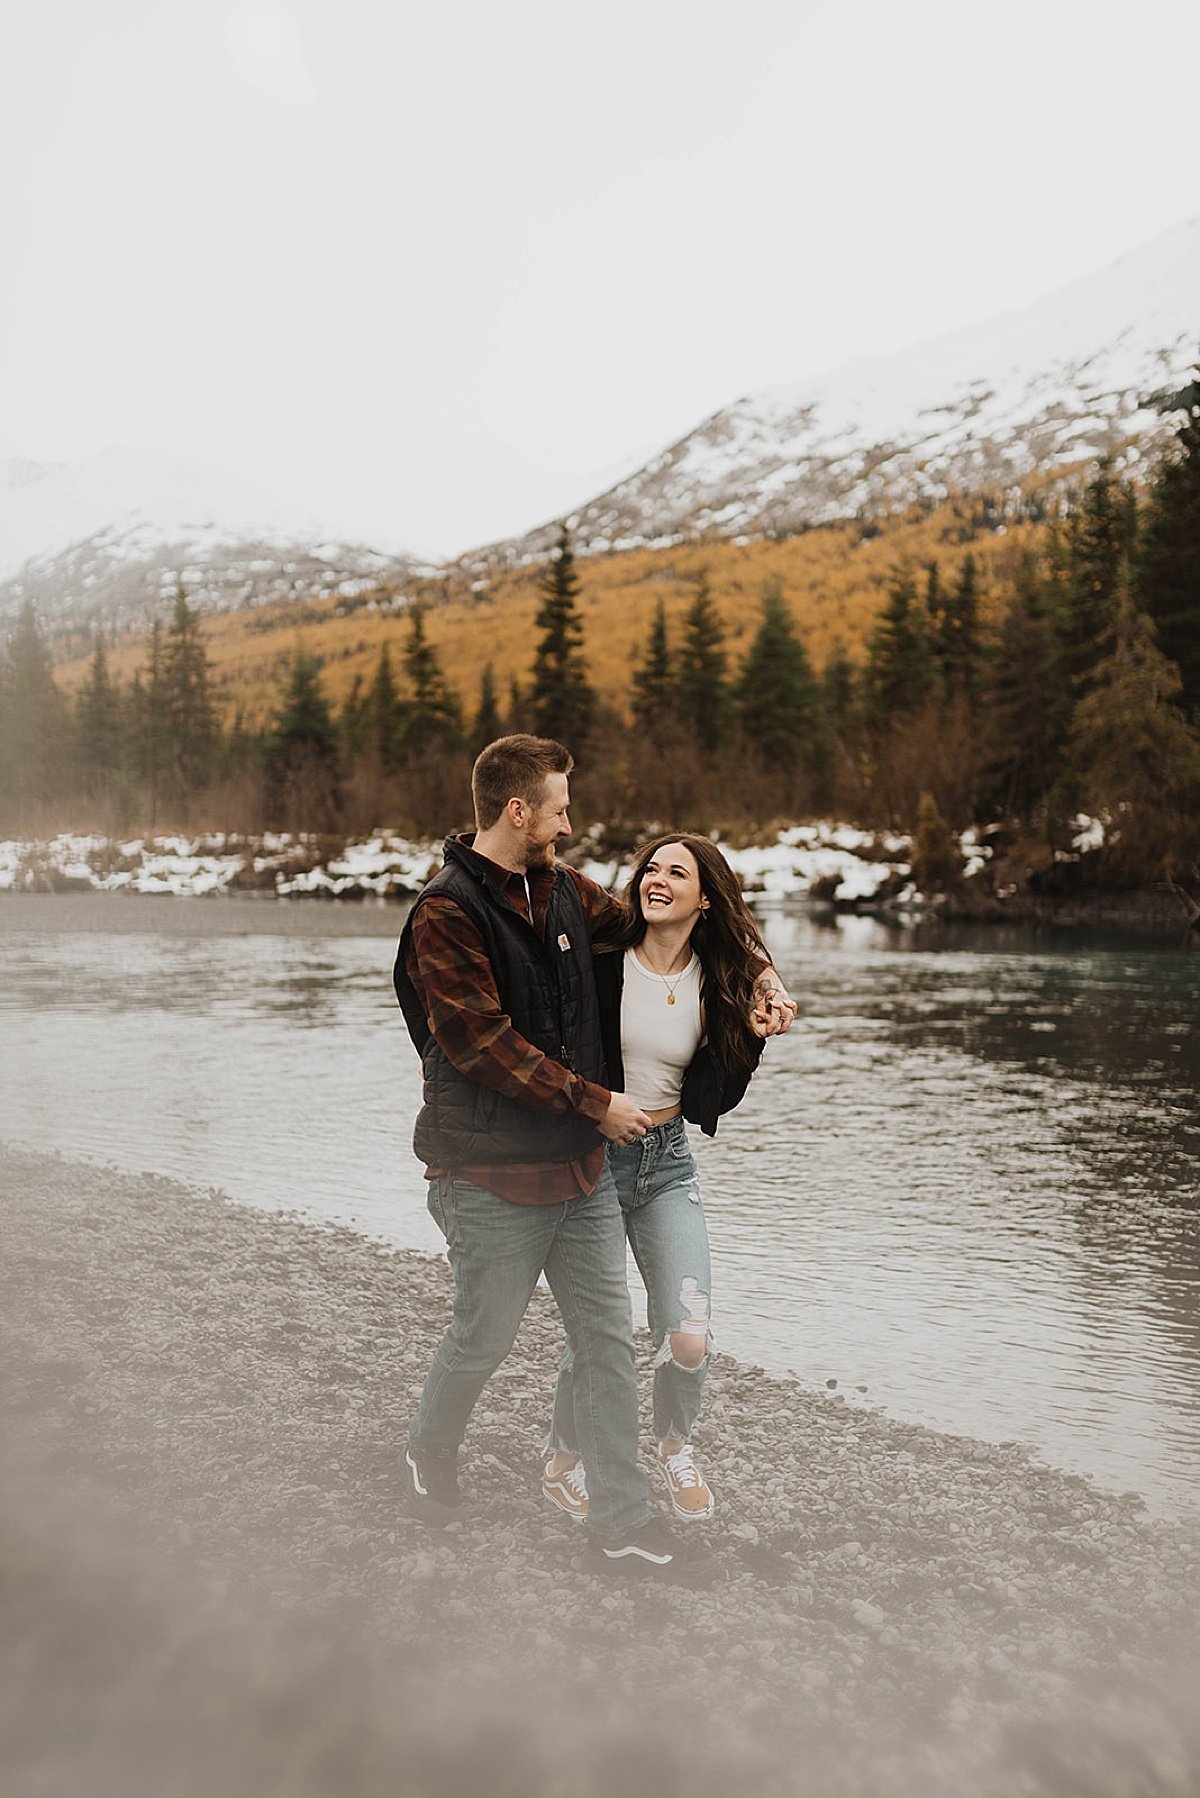  outdoorsy couple in plaid flannel shirts walk along mountain lake beach in engagement session by theresa mcdonald photography 